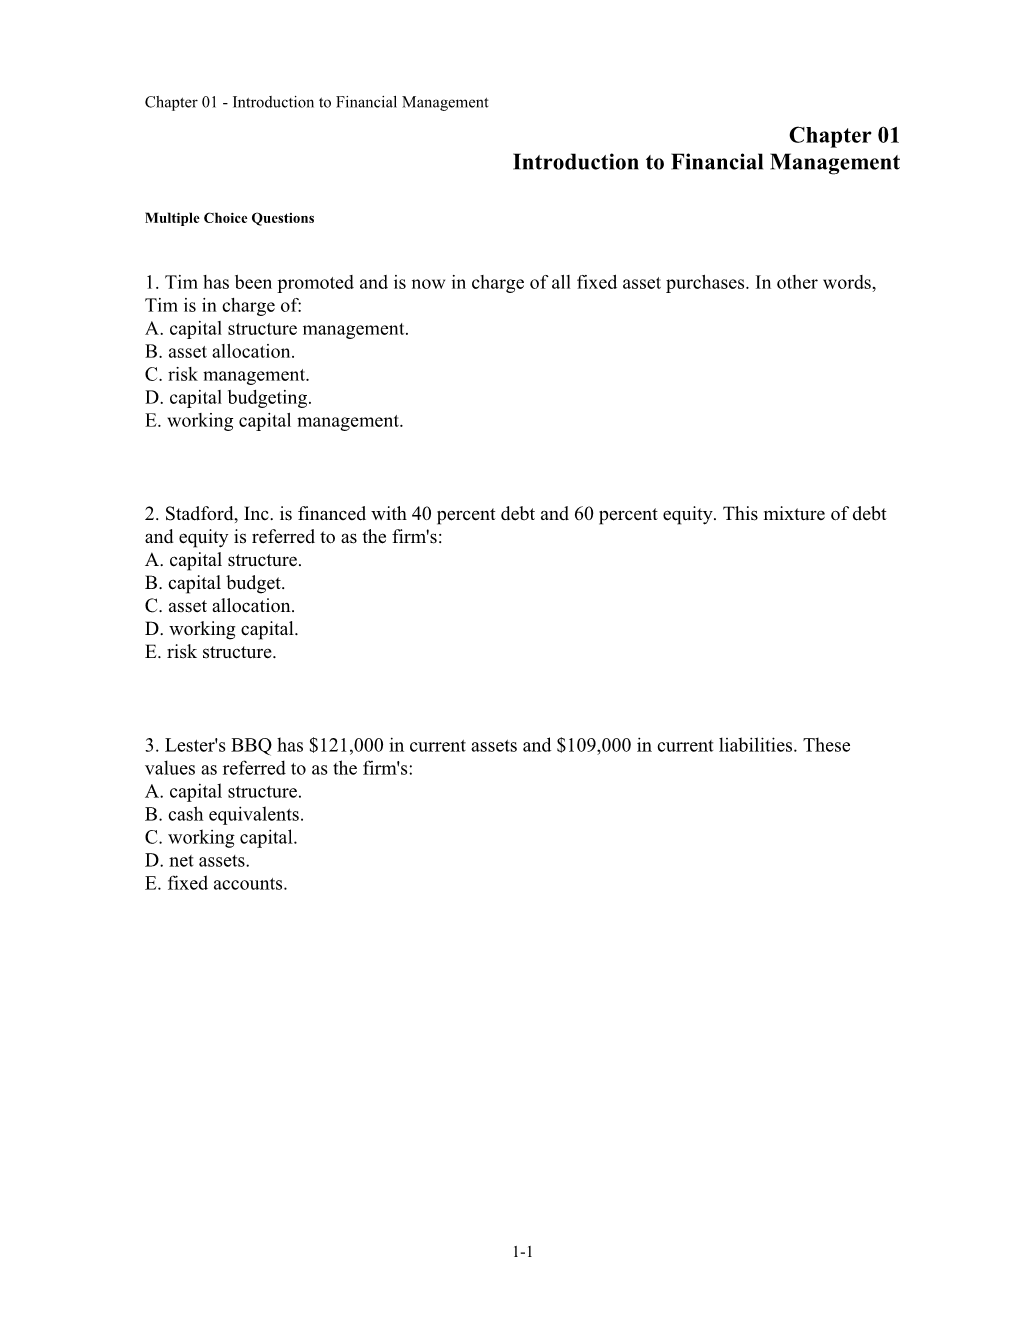 Chapter 01 Introduction to Financial Management s1